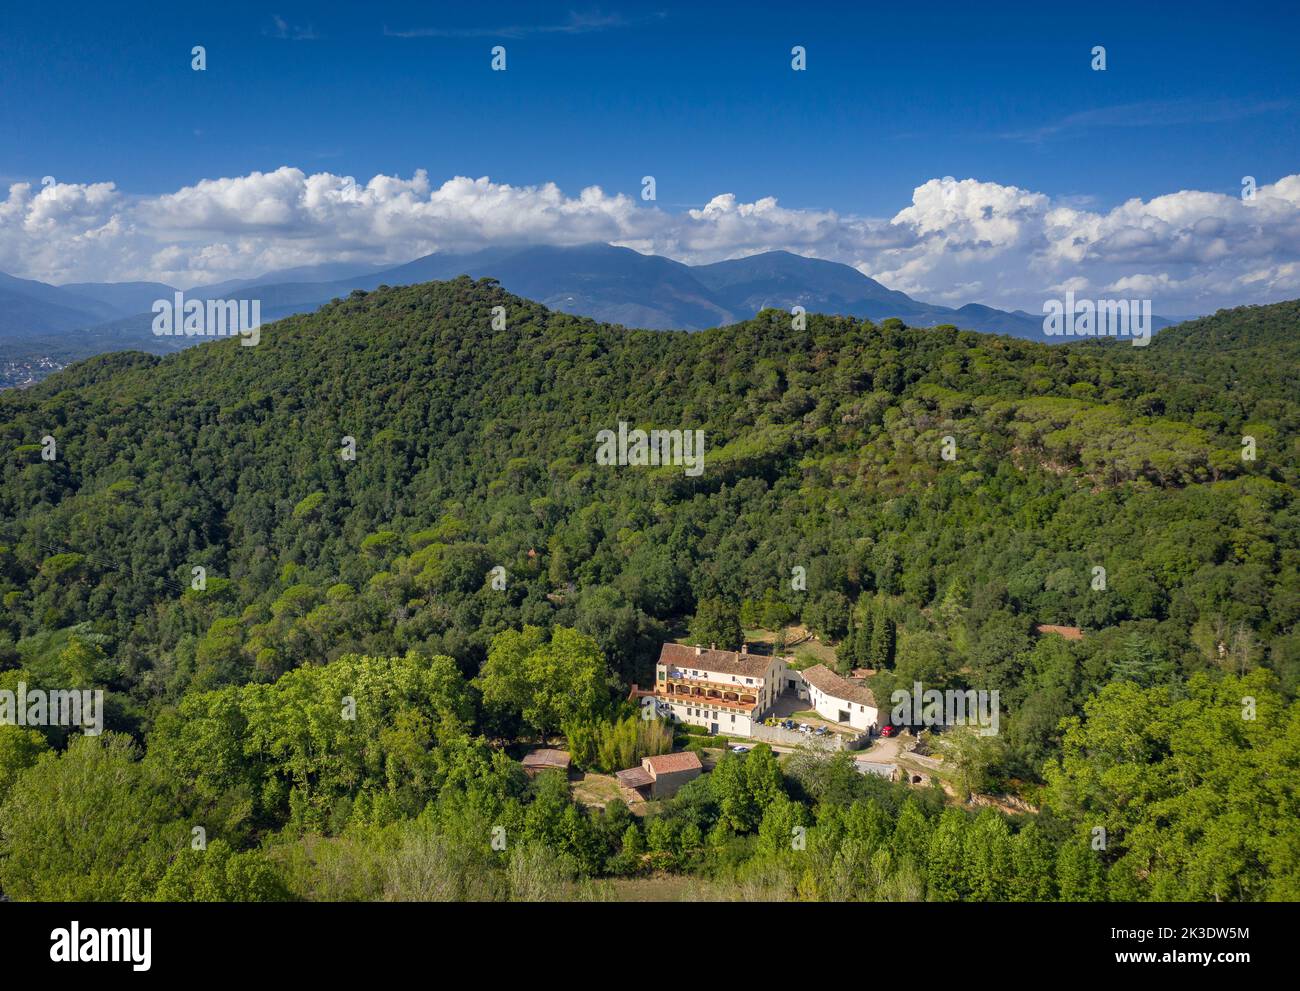 Aerial view of the Olzinelles valley in the Montnegre-Corredor natural park. In the foreground, the Can Valls country house (Barcelona, Spain) Stock Photo